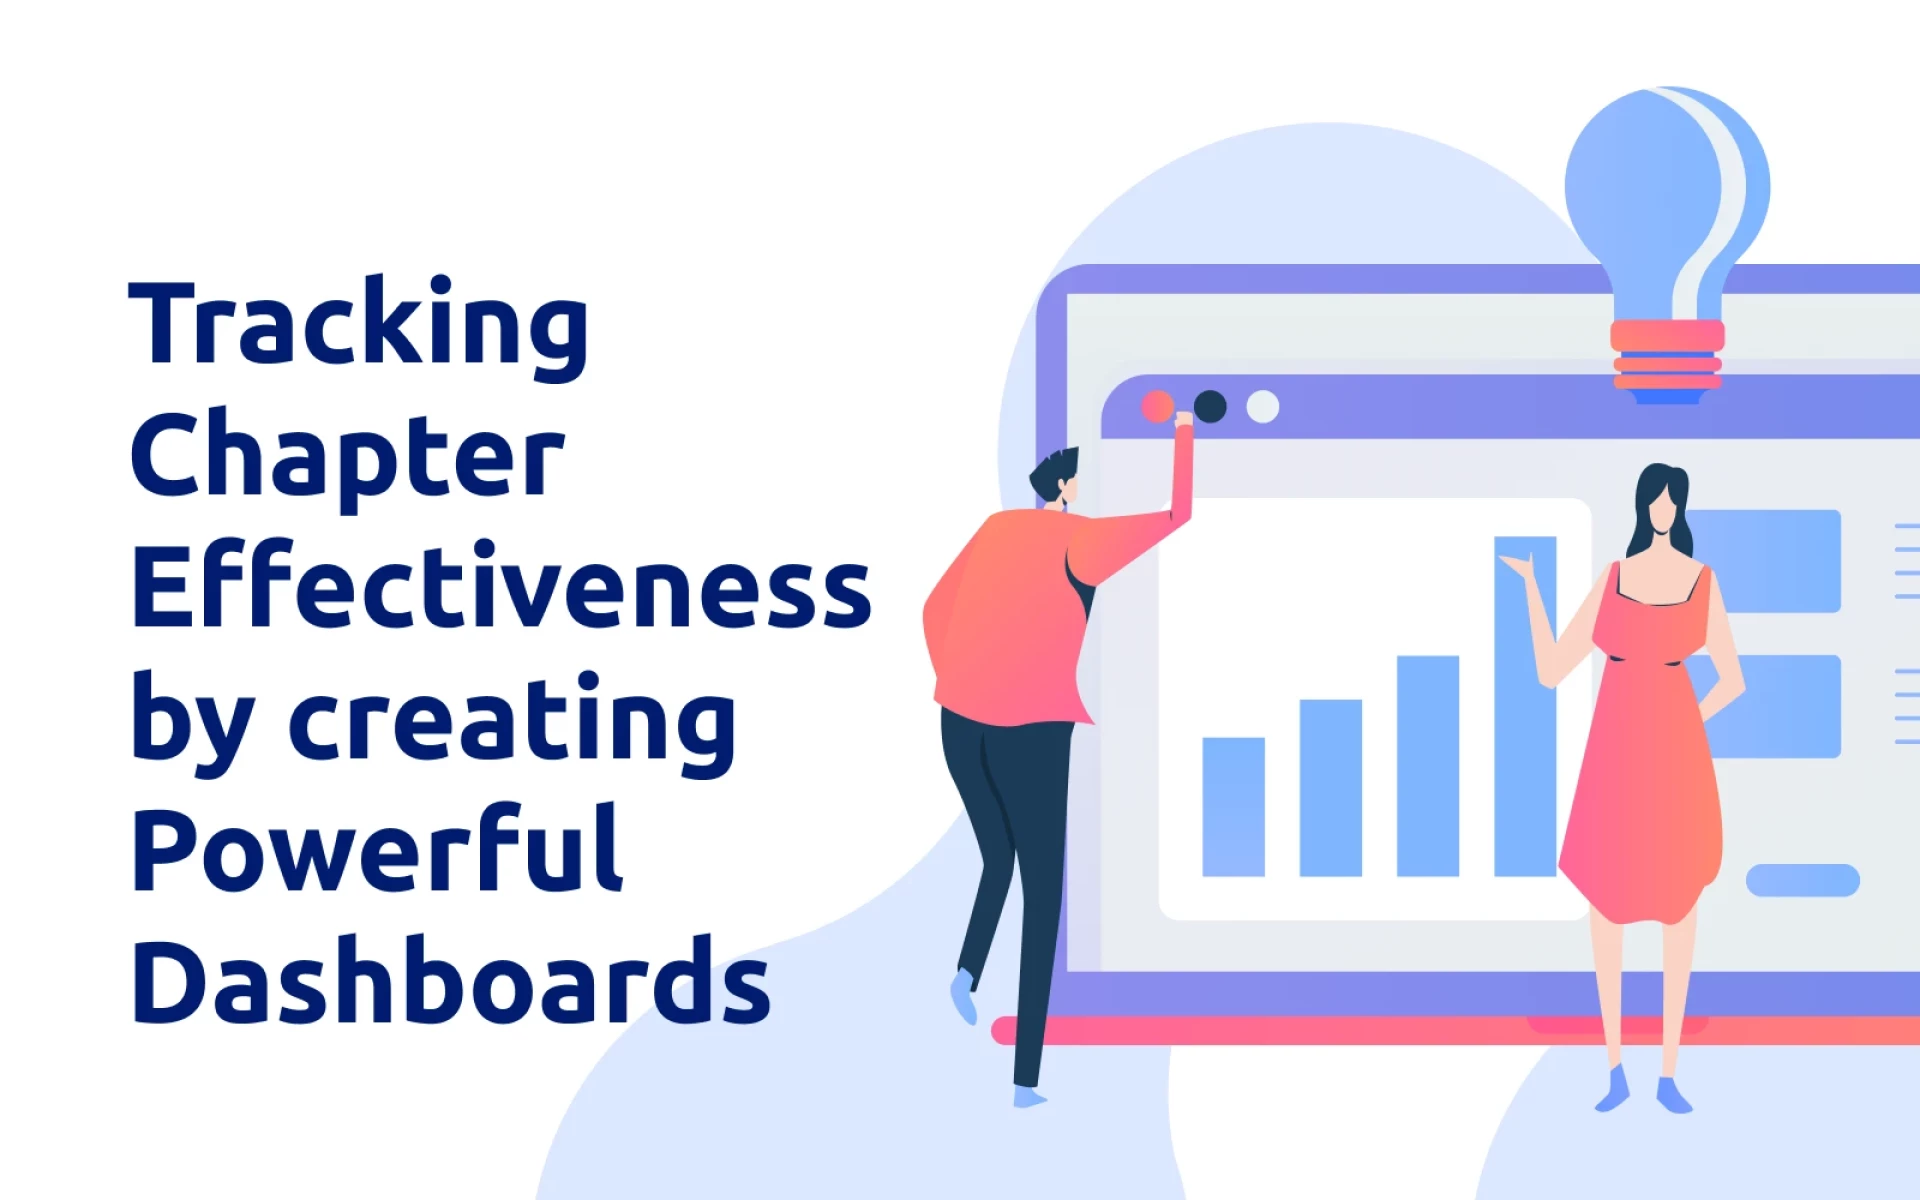 Tracking Chapter Effectiveness by creating Powerful Dashboards